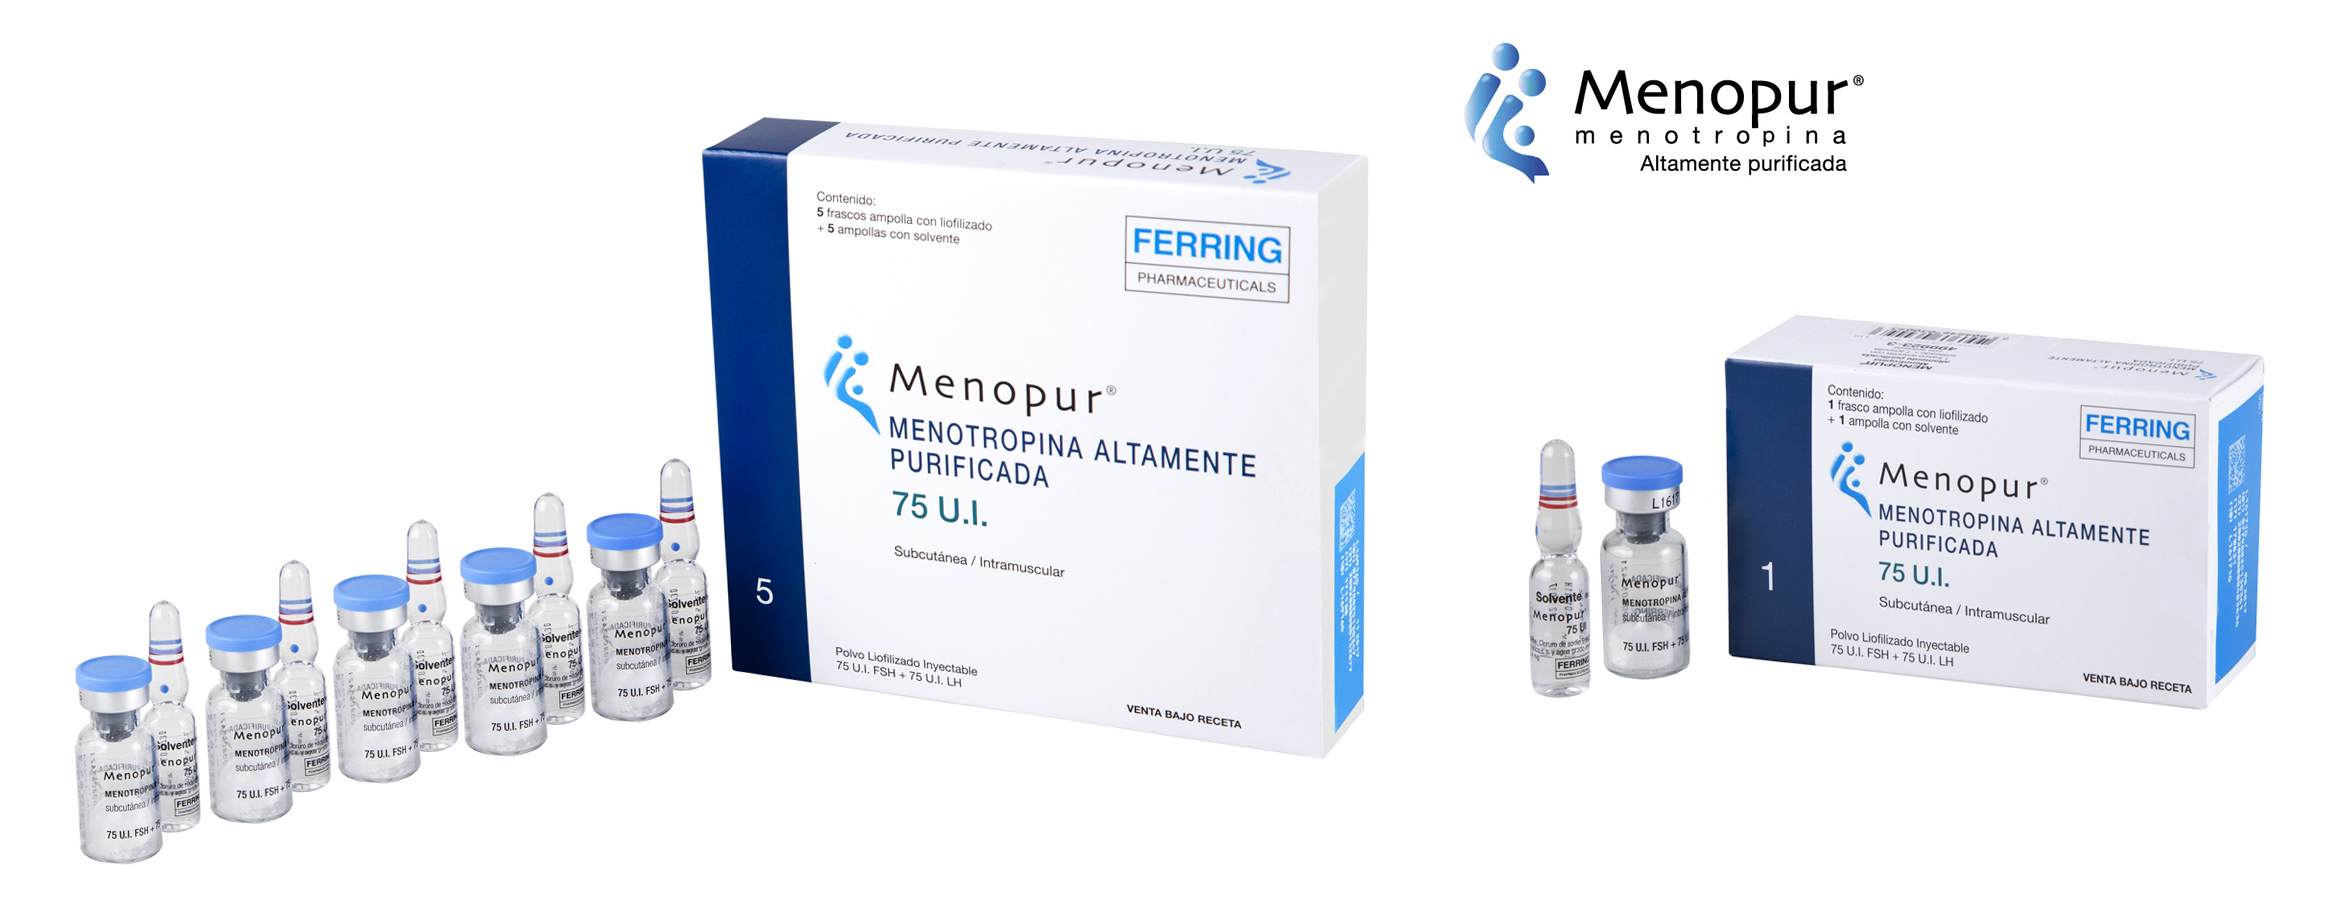 menopur-injection-for-personal-5-rs-7352-piece-silverline-medicare